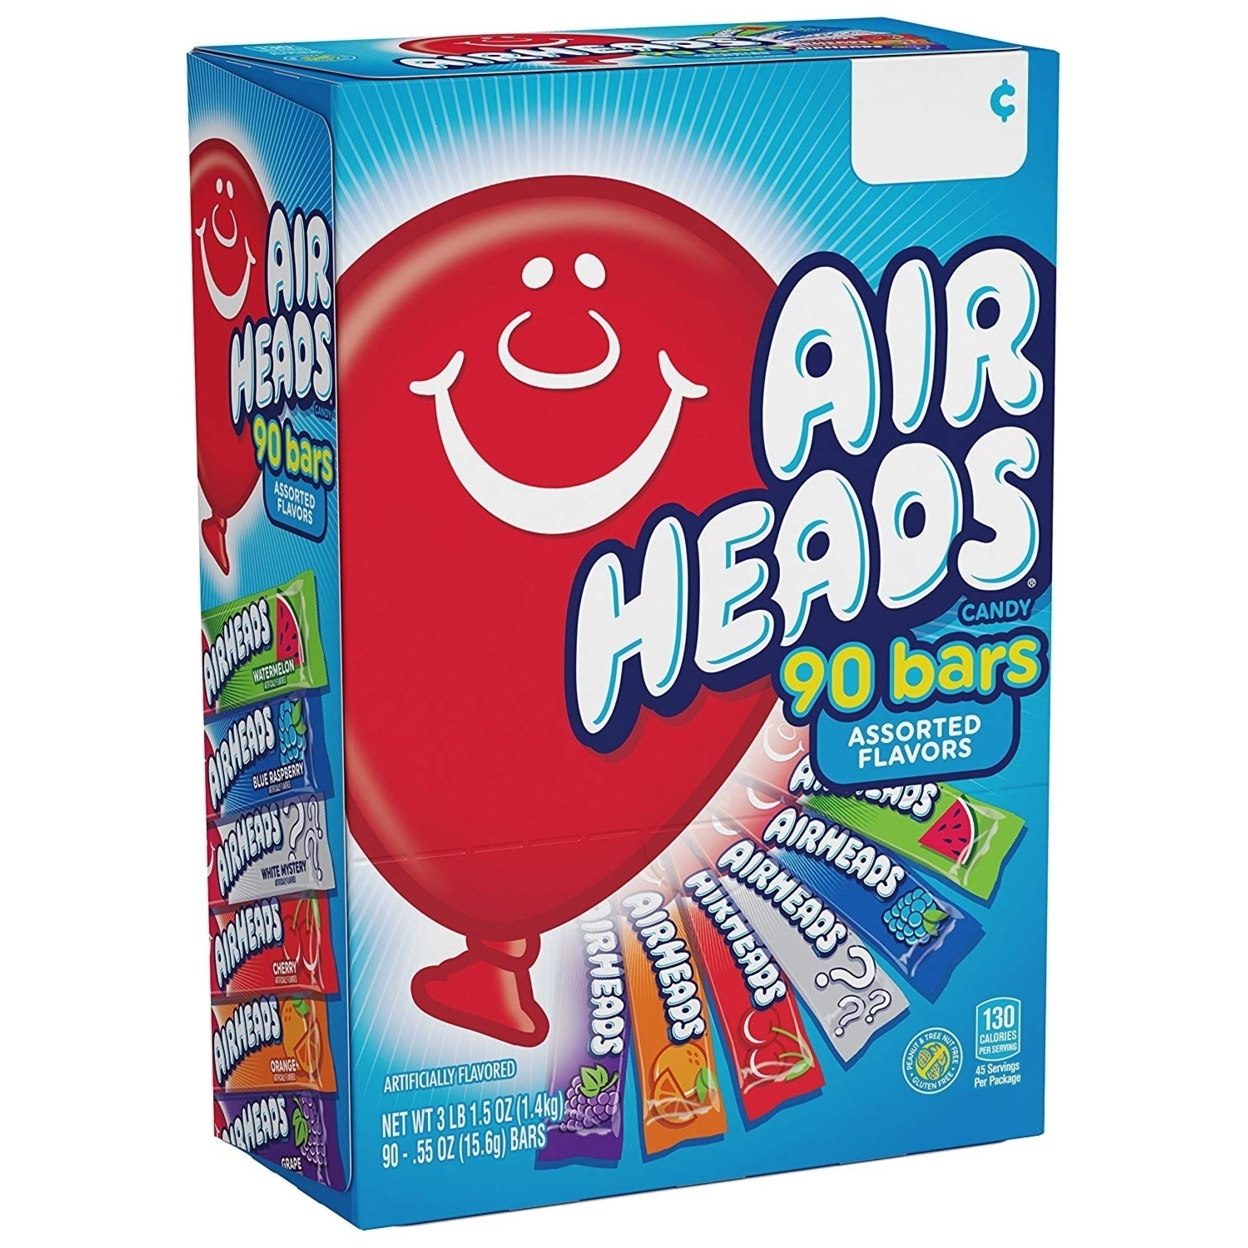 Airheads Individually Wrapped Fruit Candy Variety Gravity Feed Box, 90 Count - image 1 of 5